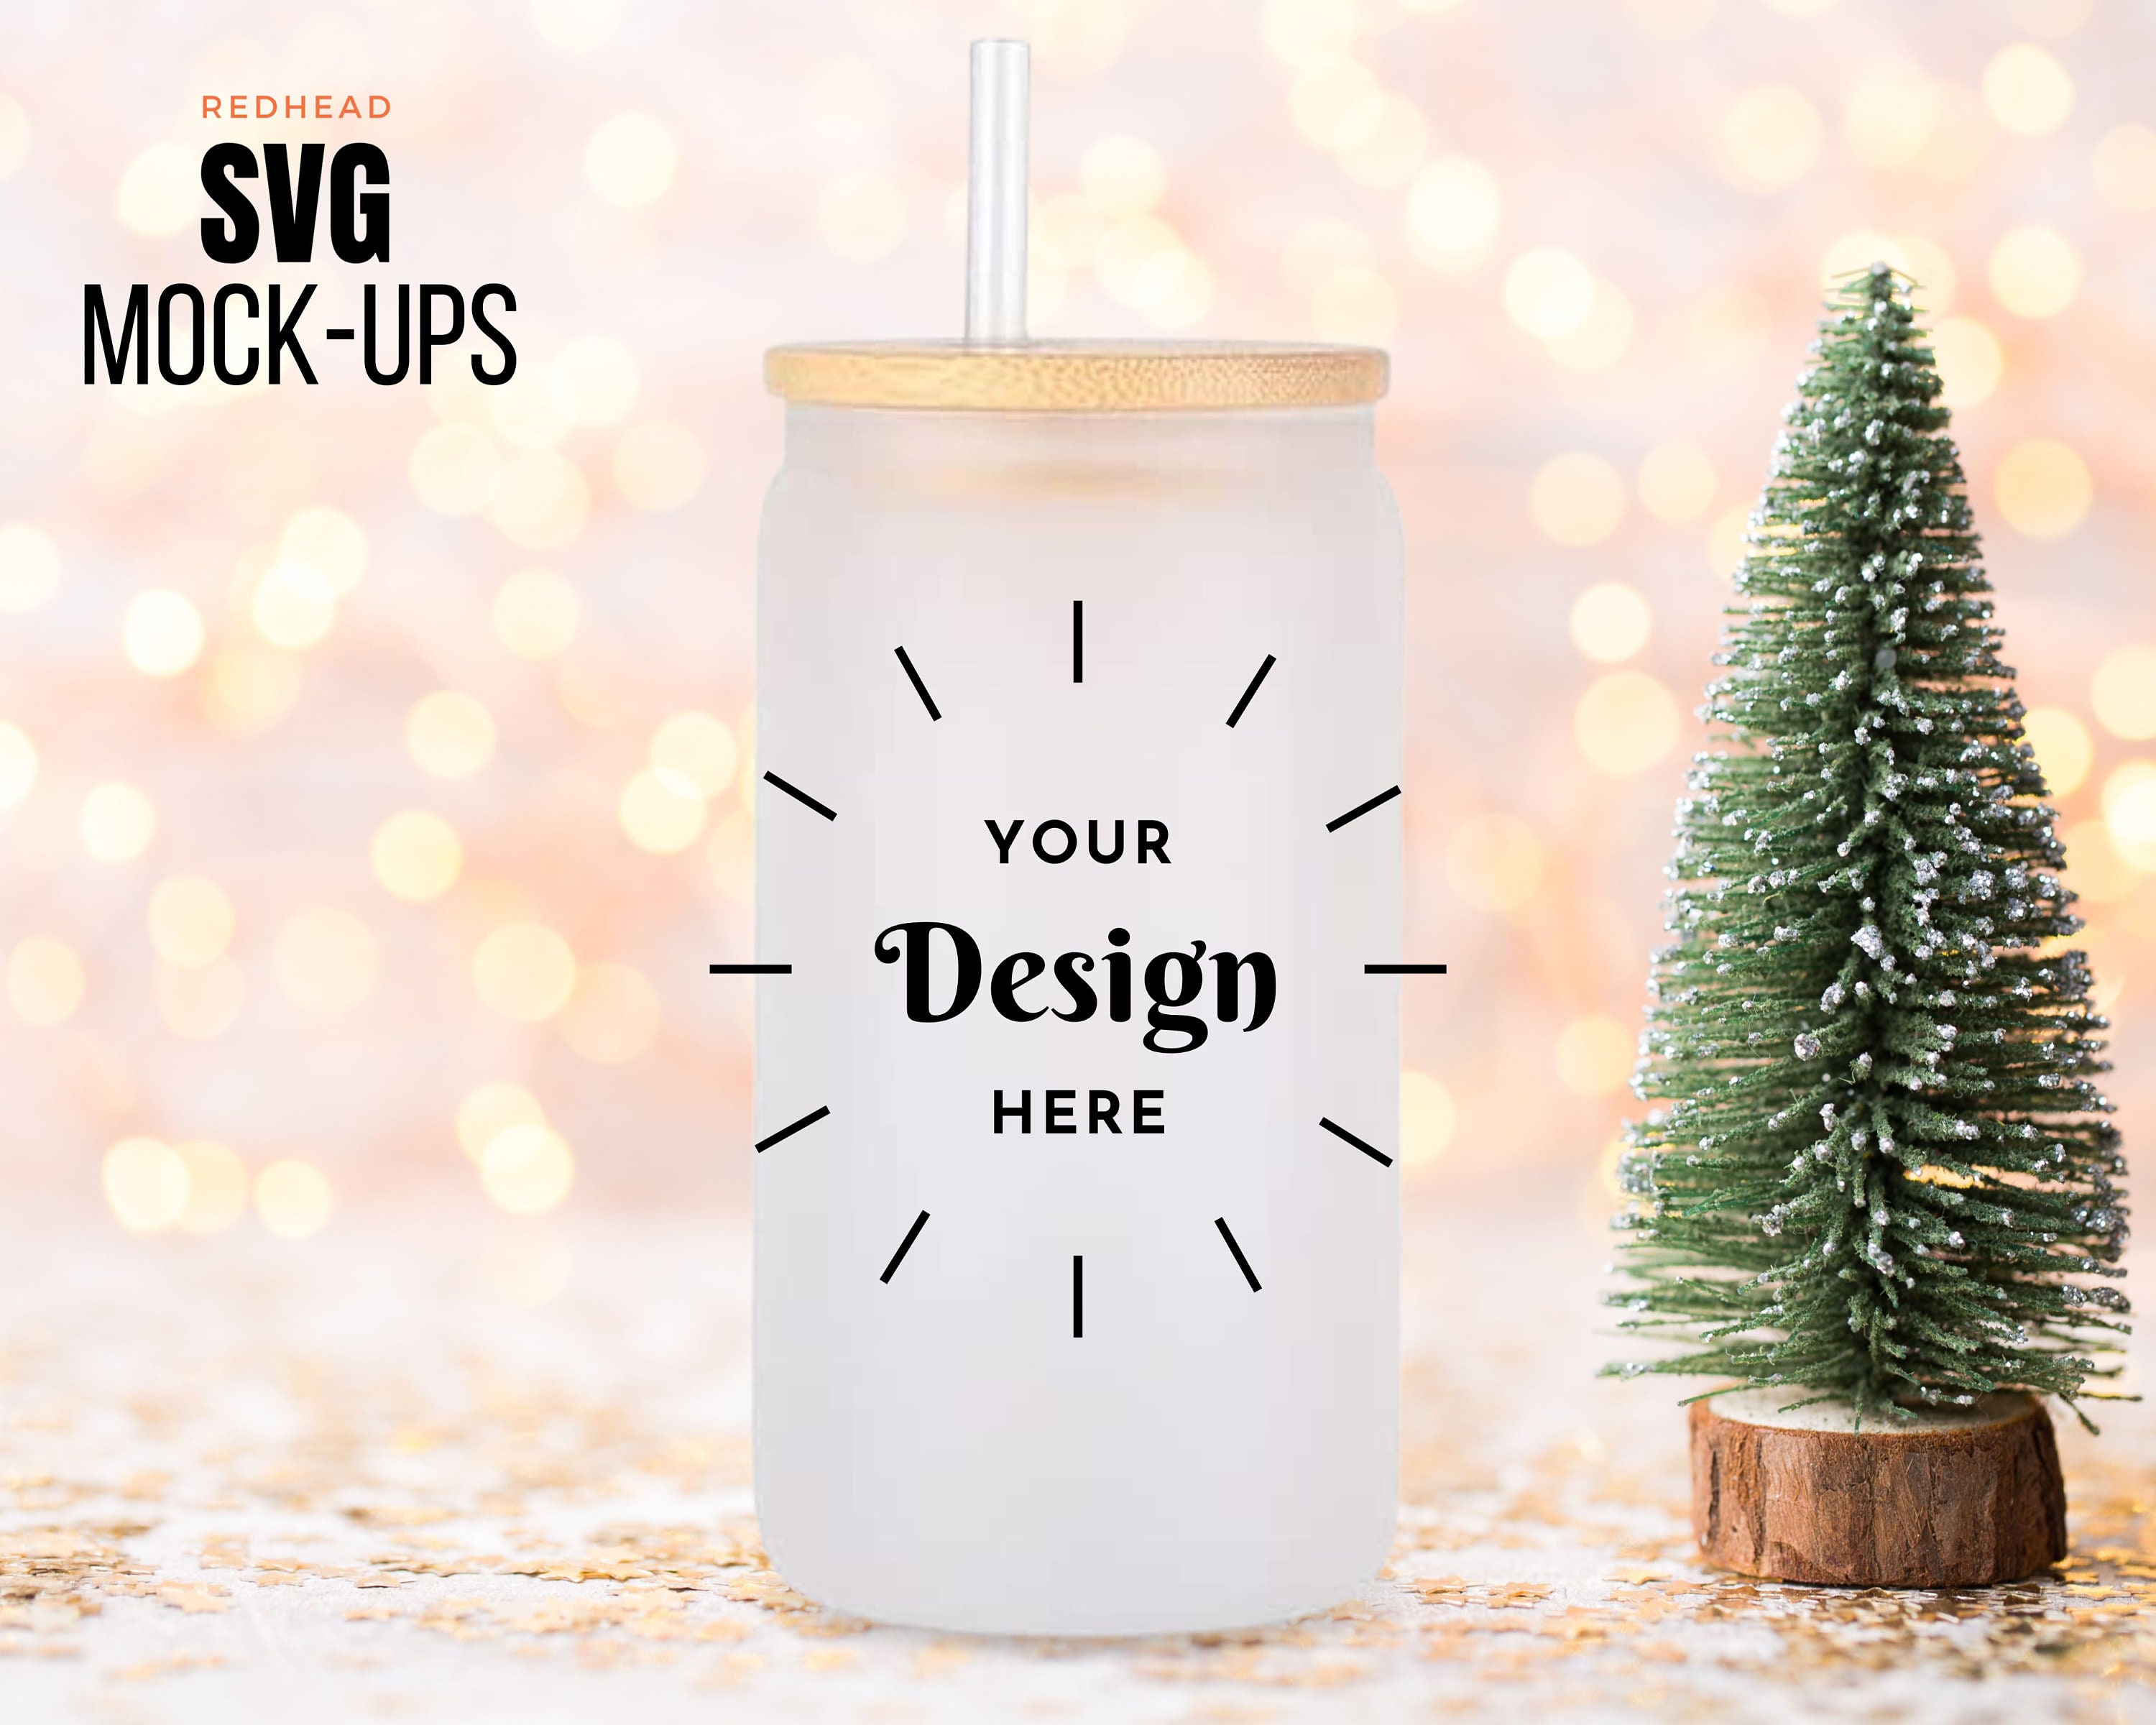 16oz Frosted Glass Cups - Christmas Designs